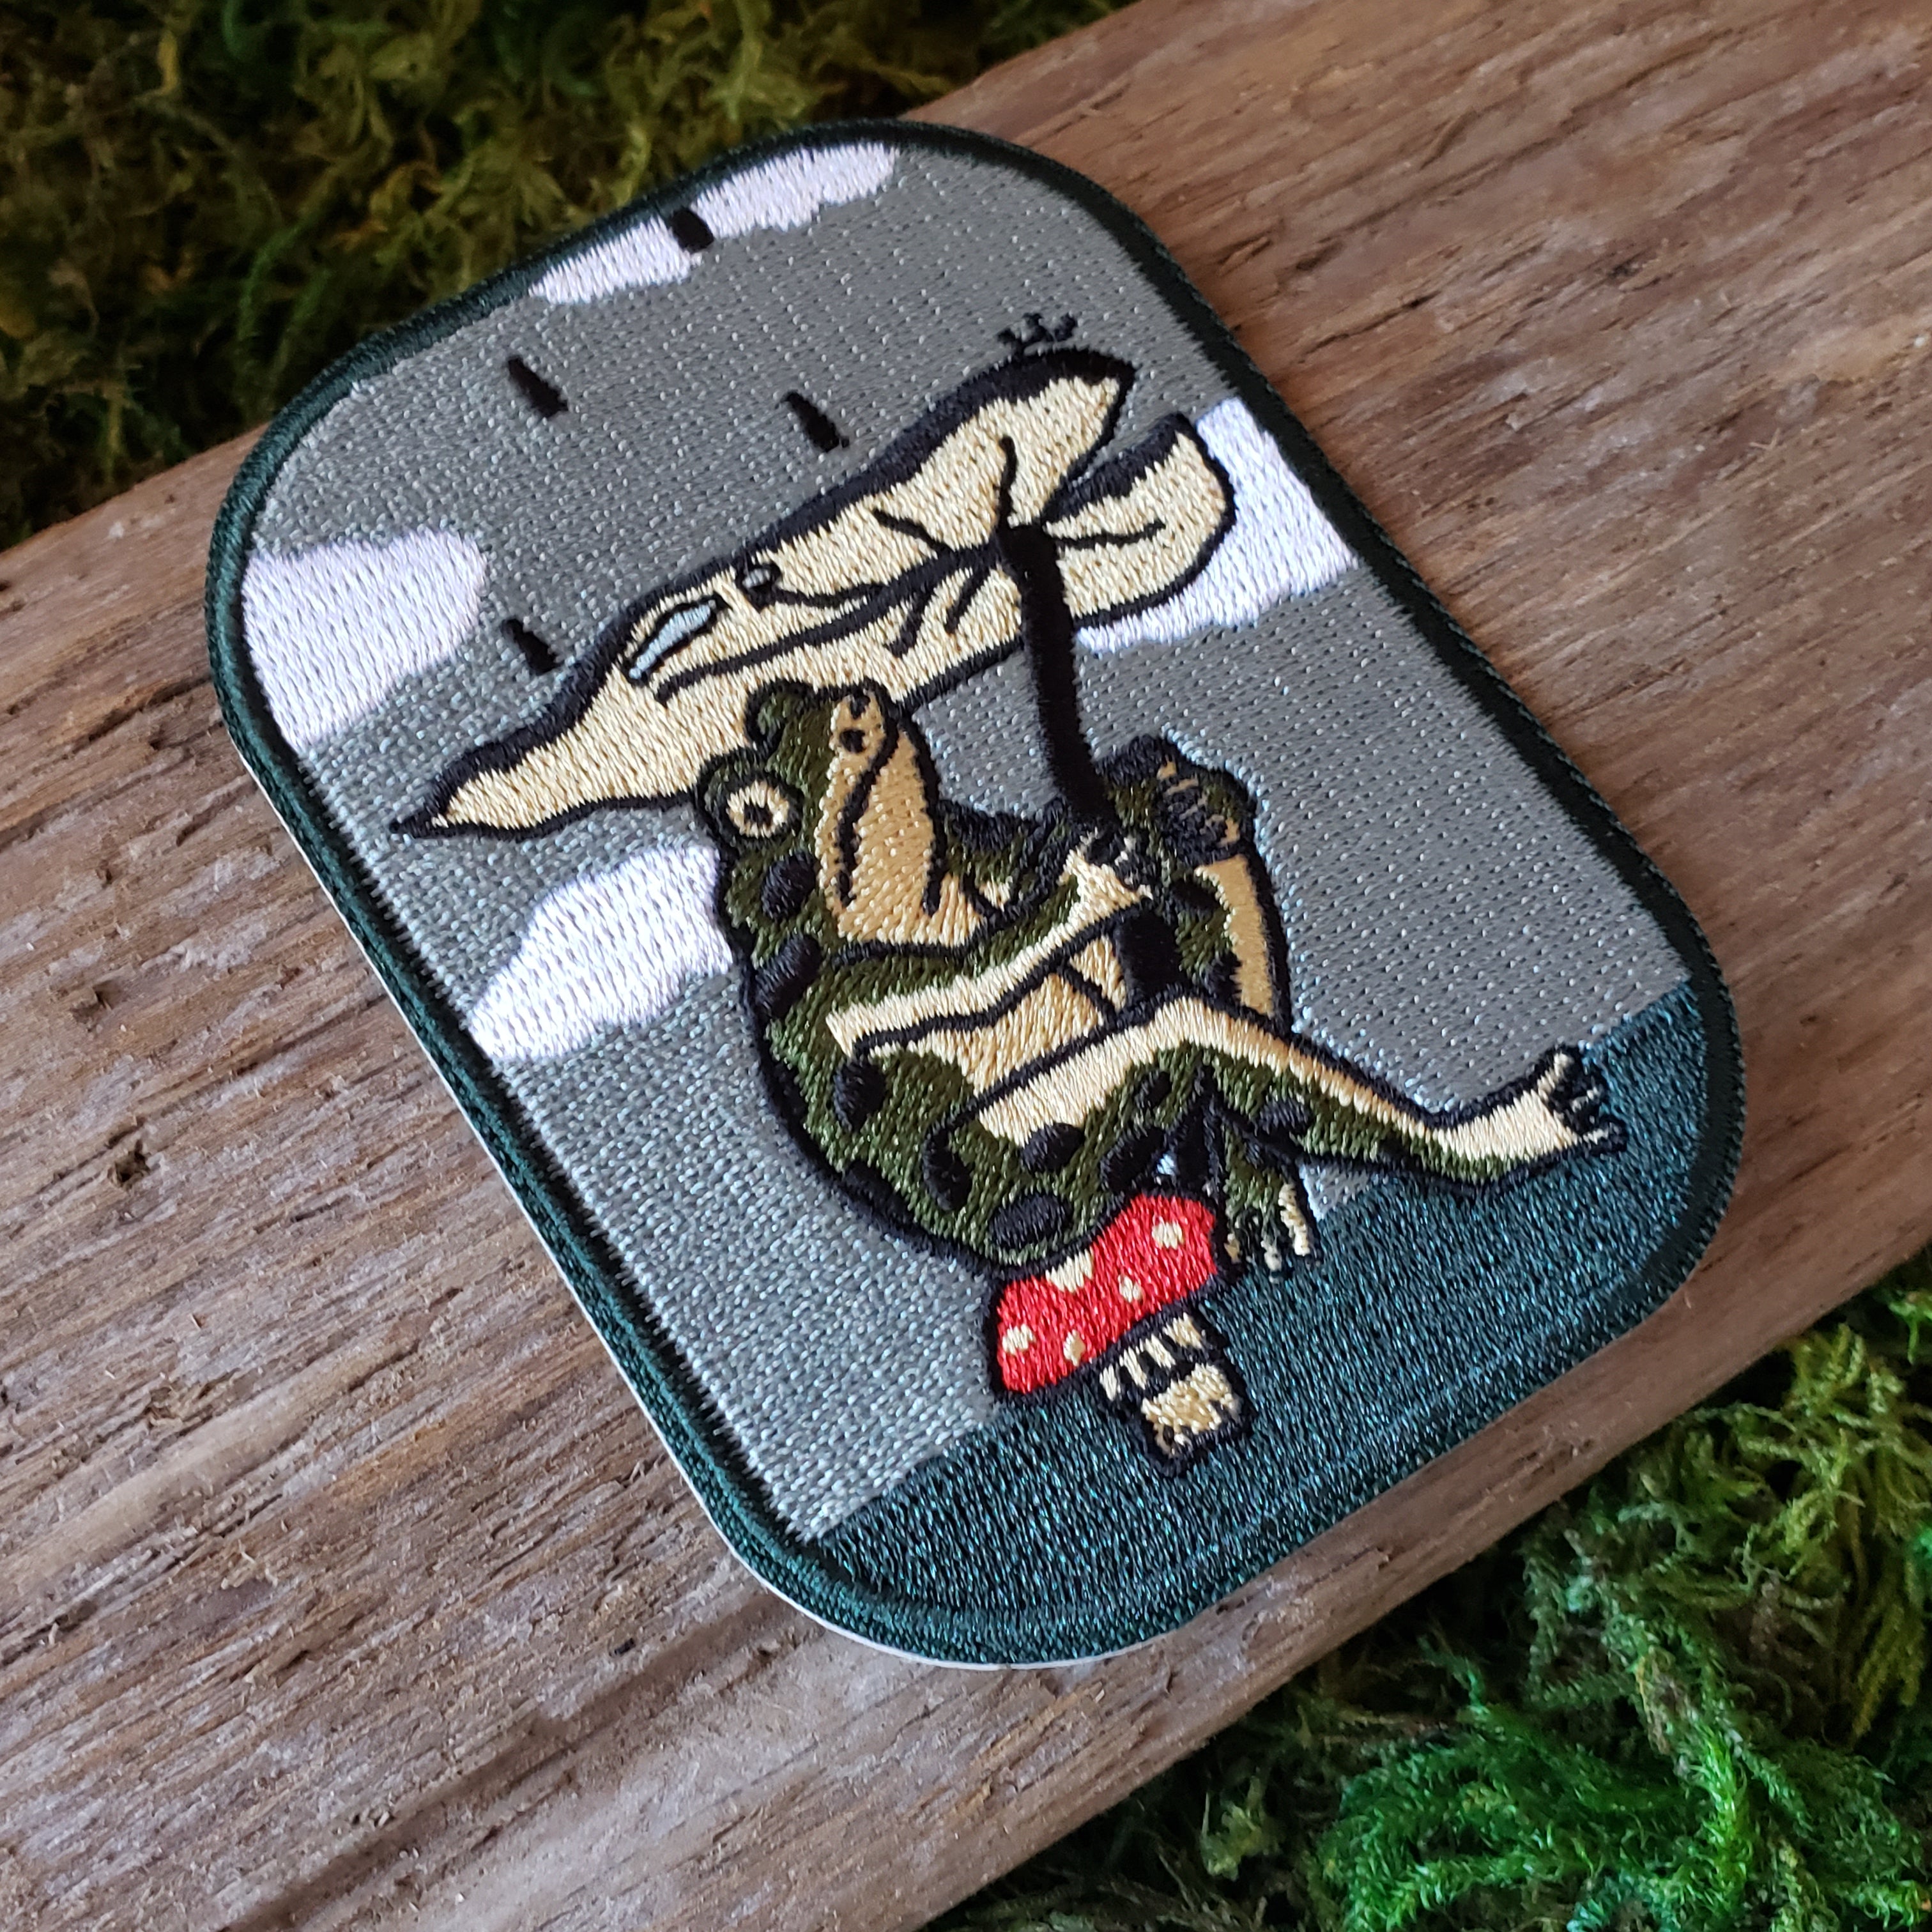 Toad Stool Iron-On Patch